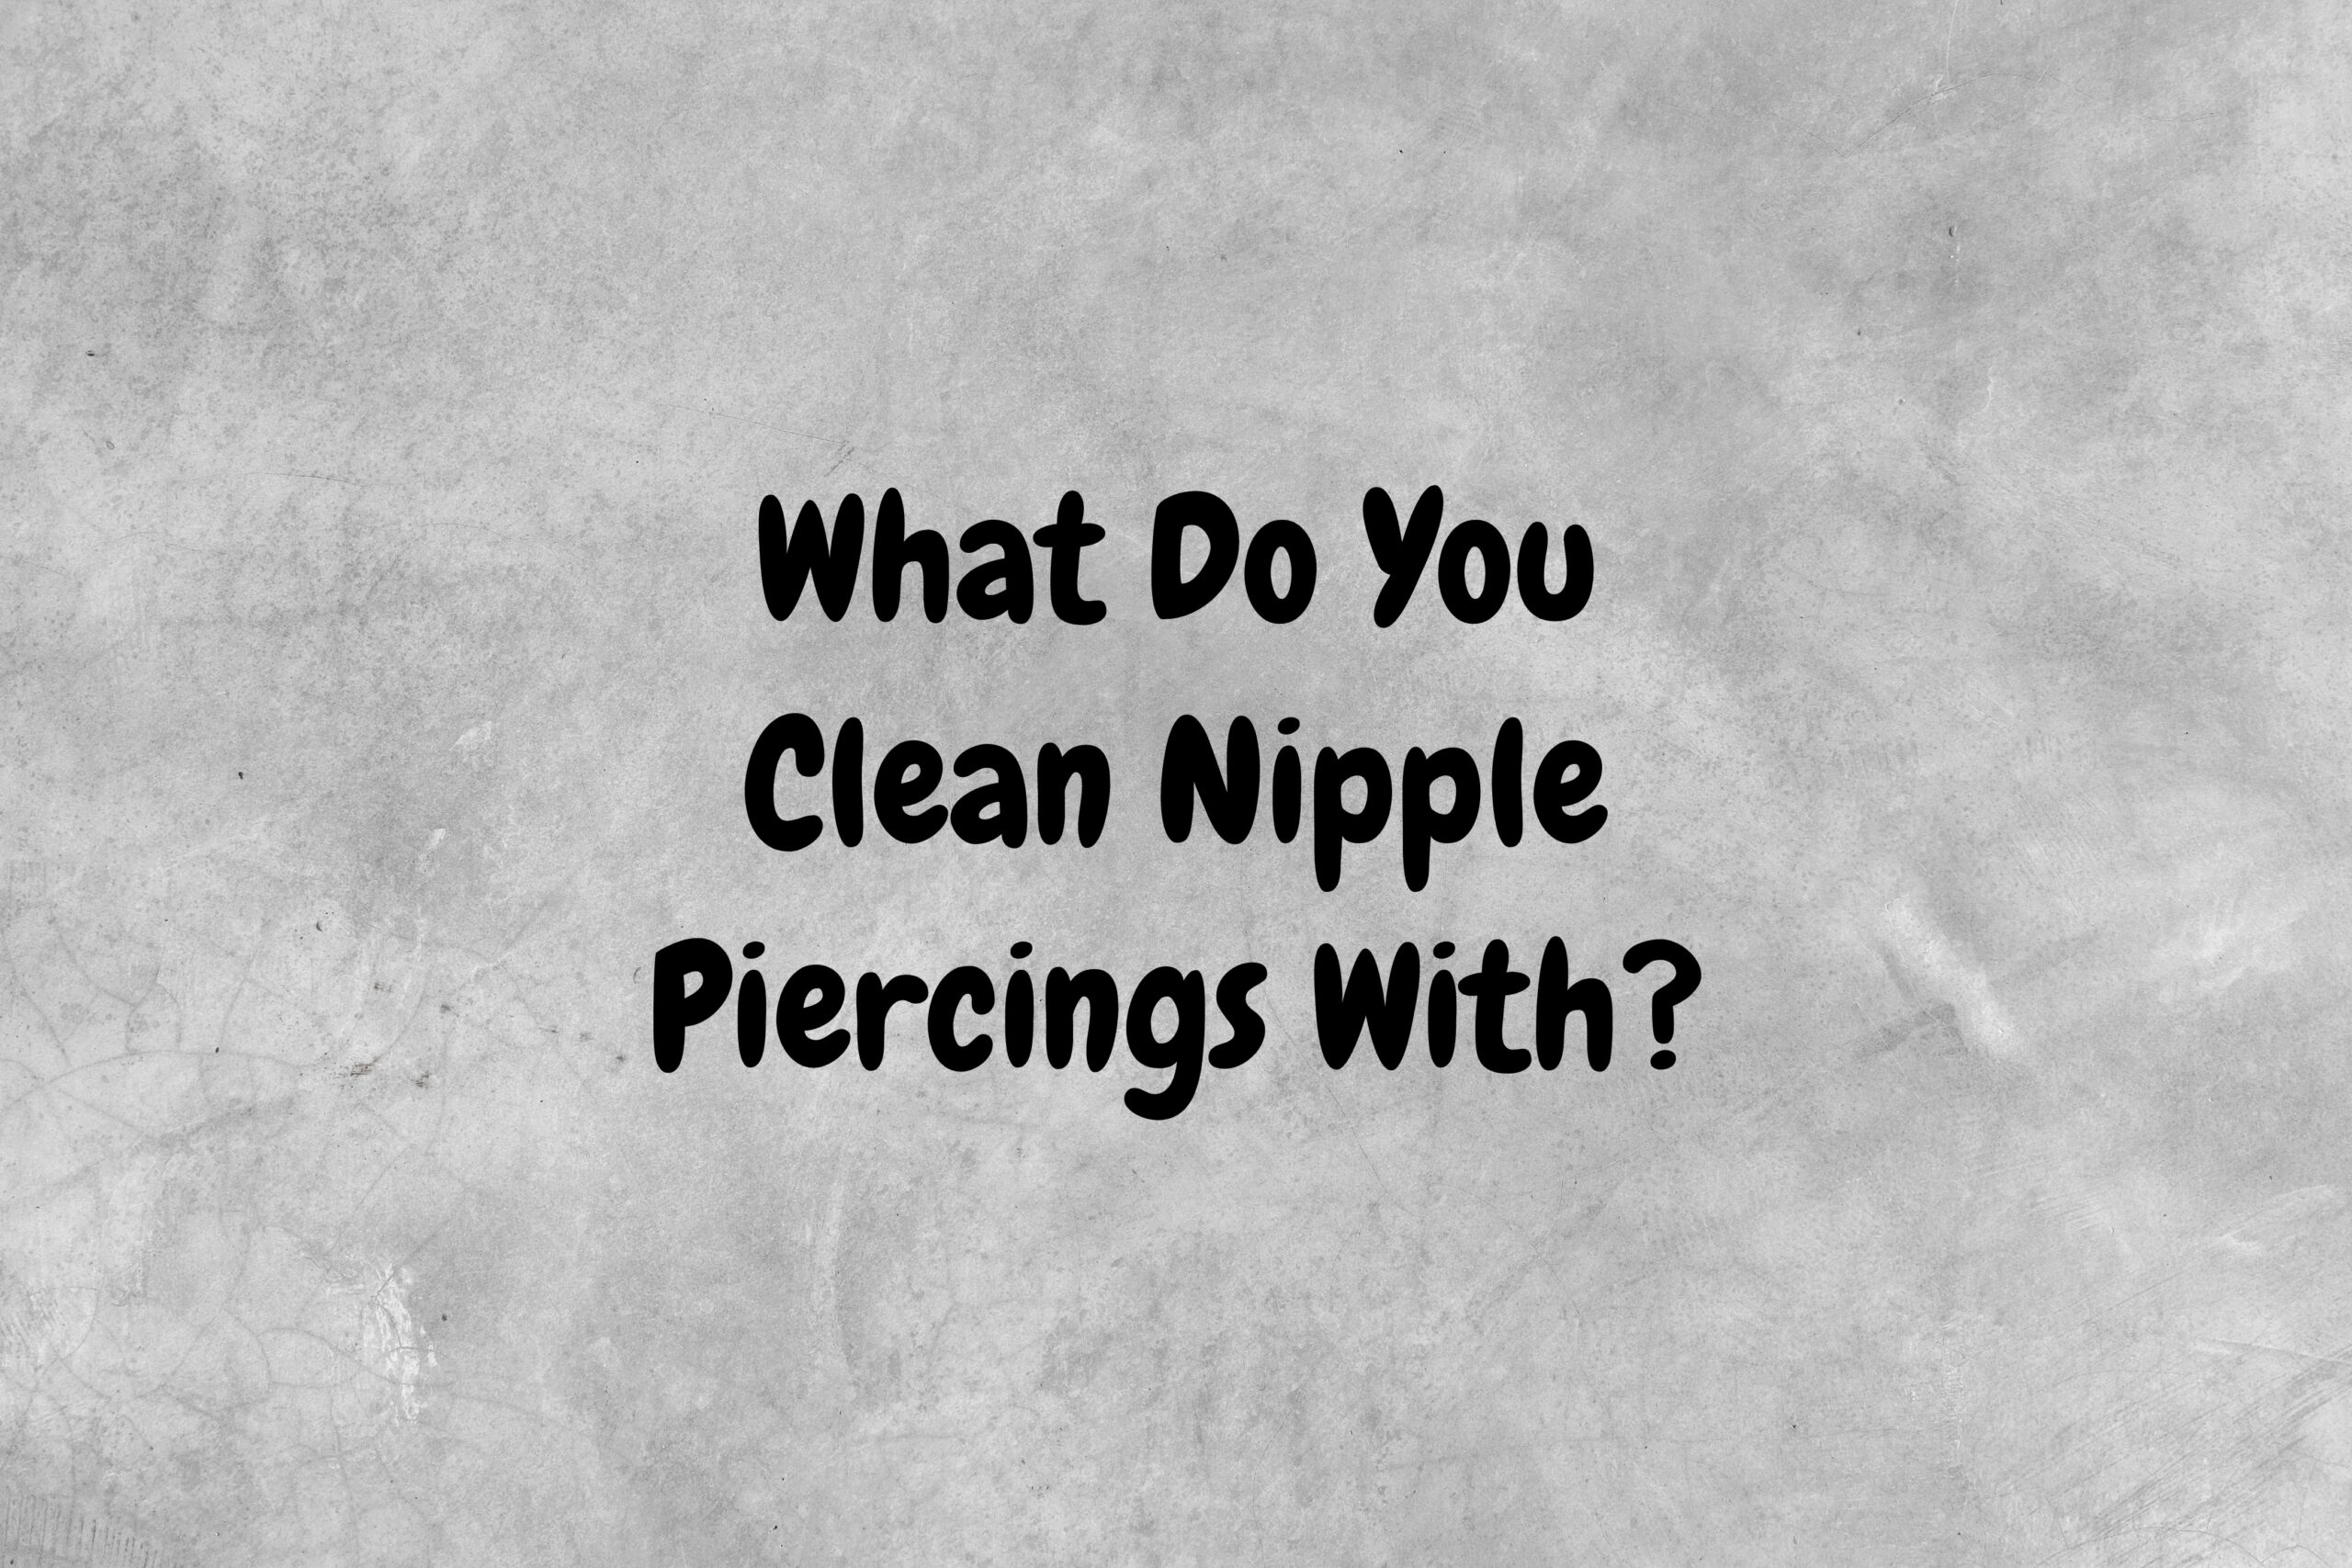 An image with a gray background that has black text asking the question, "What do you clean nipple piercings with?"